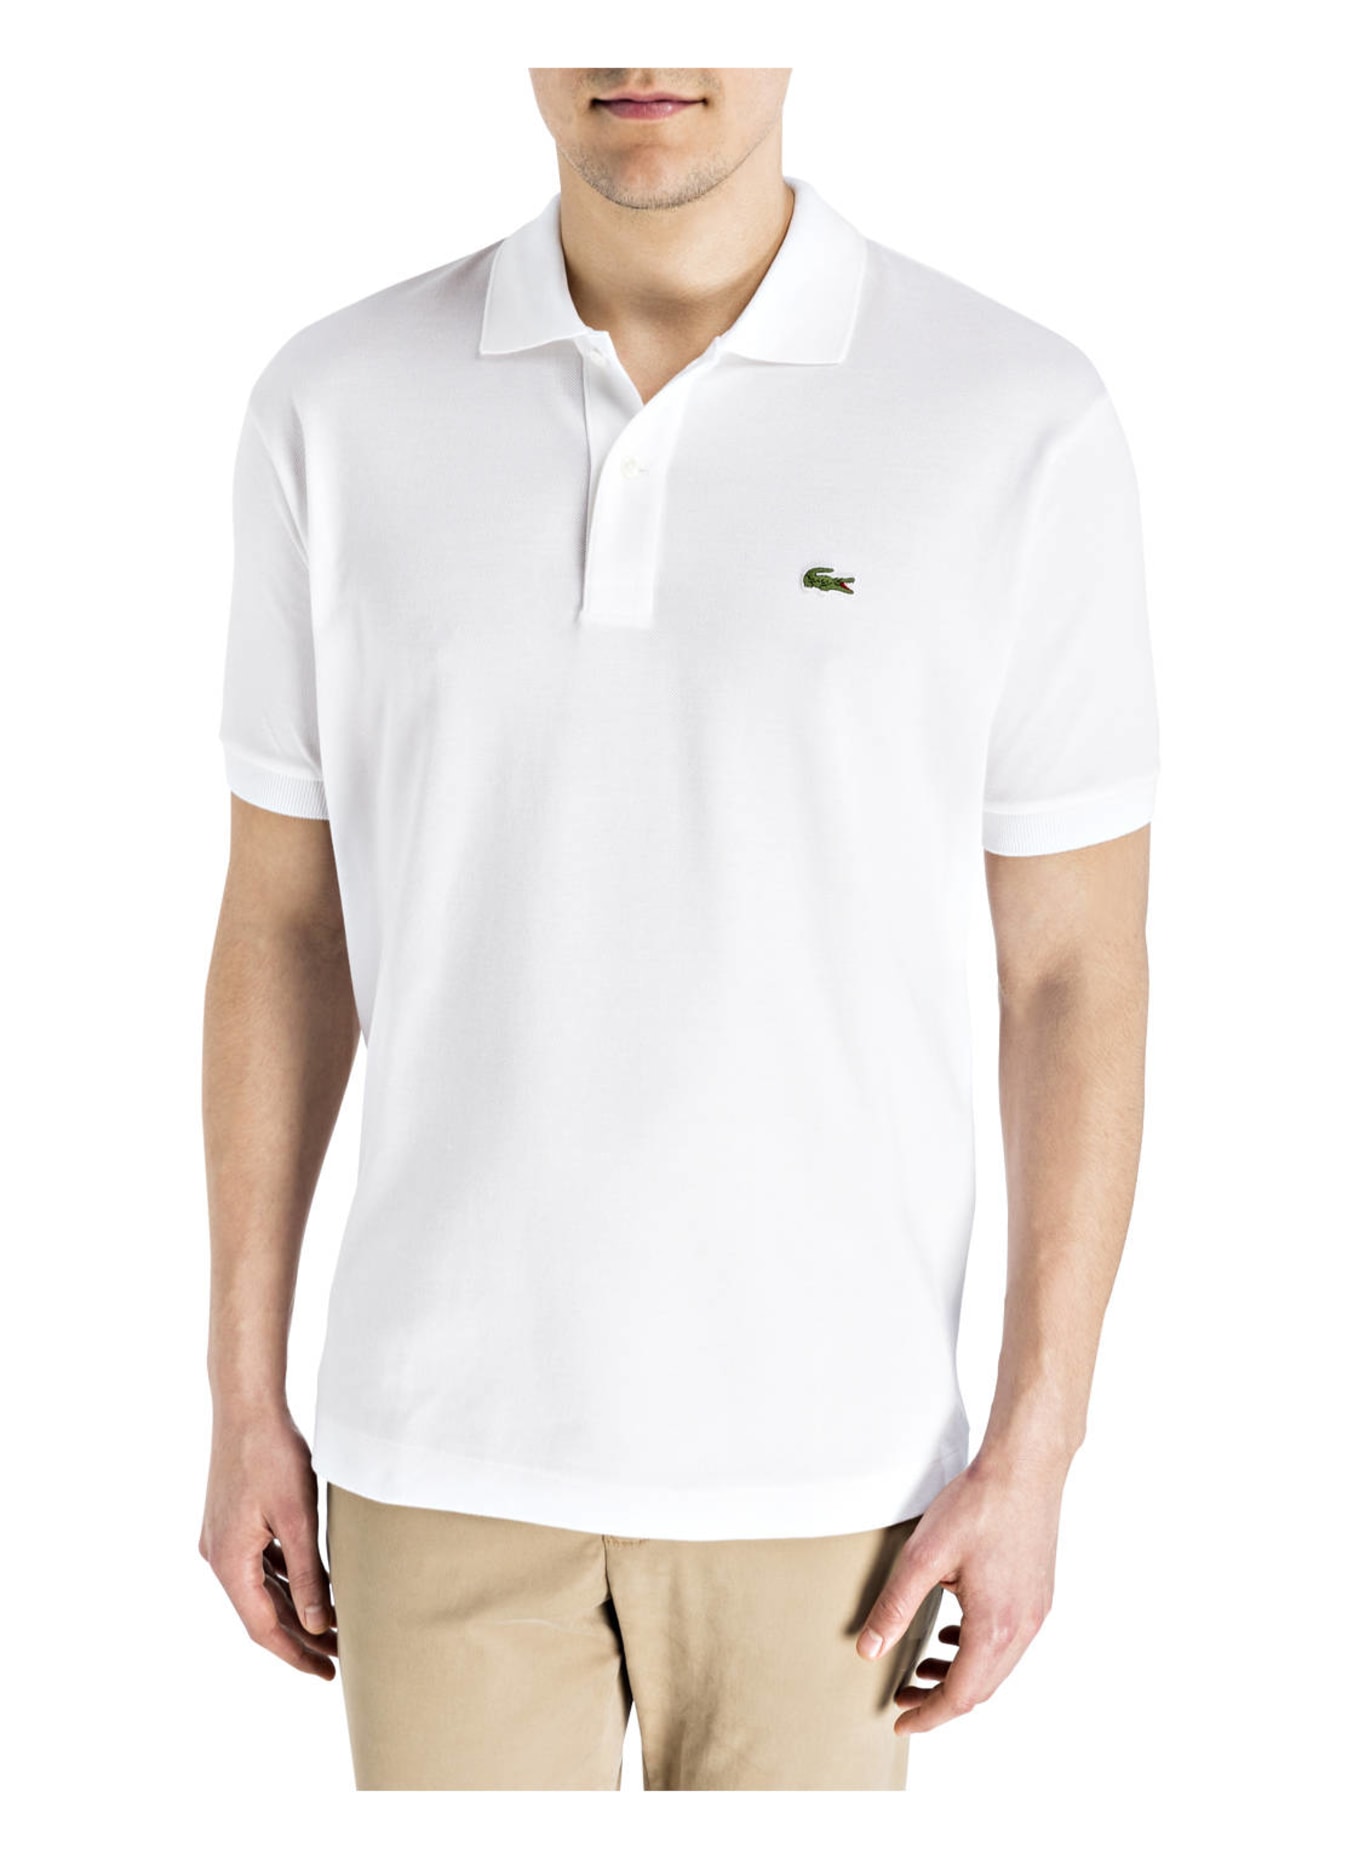 LACOSTE Piqué-Poloshirt Fit weiss in Classic